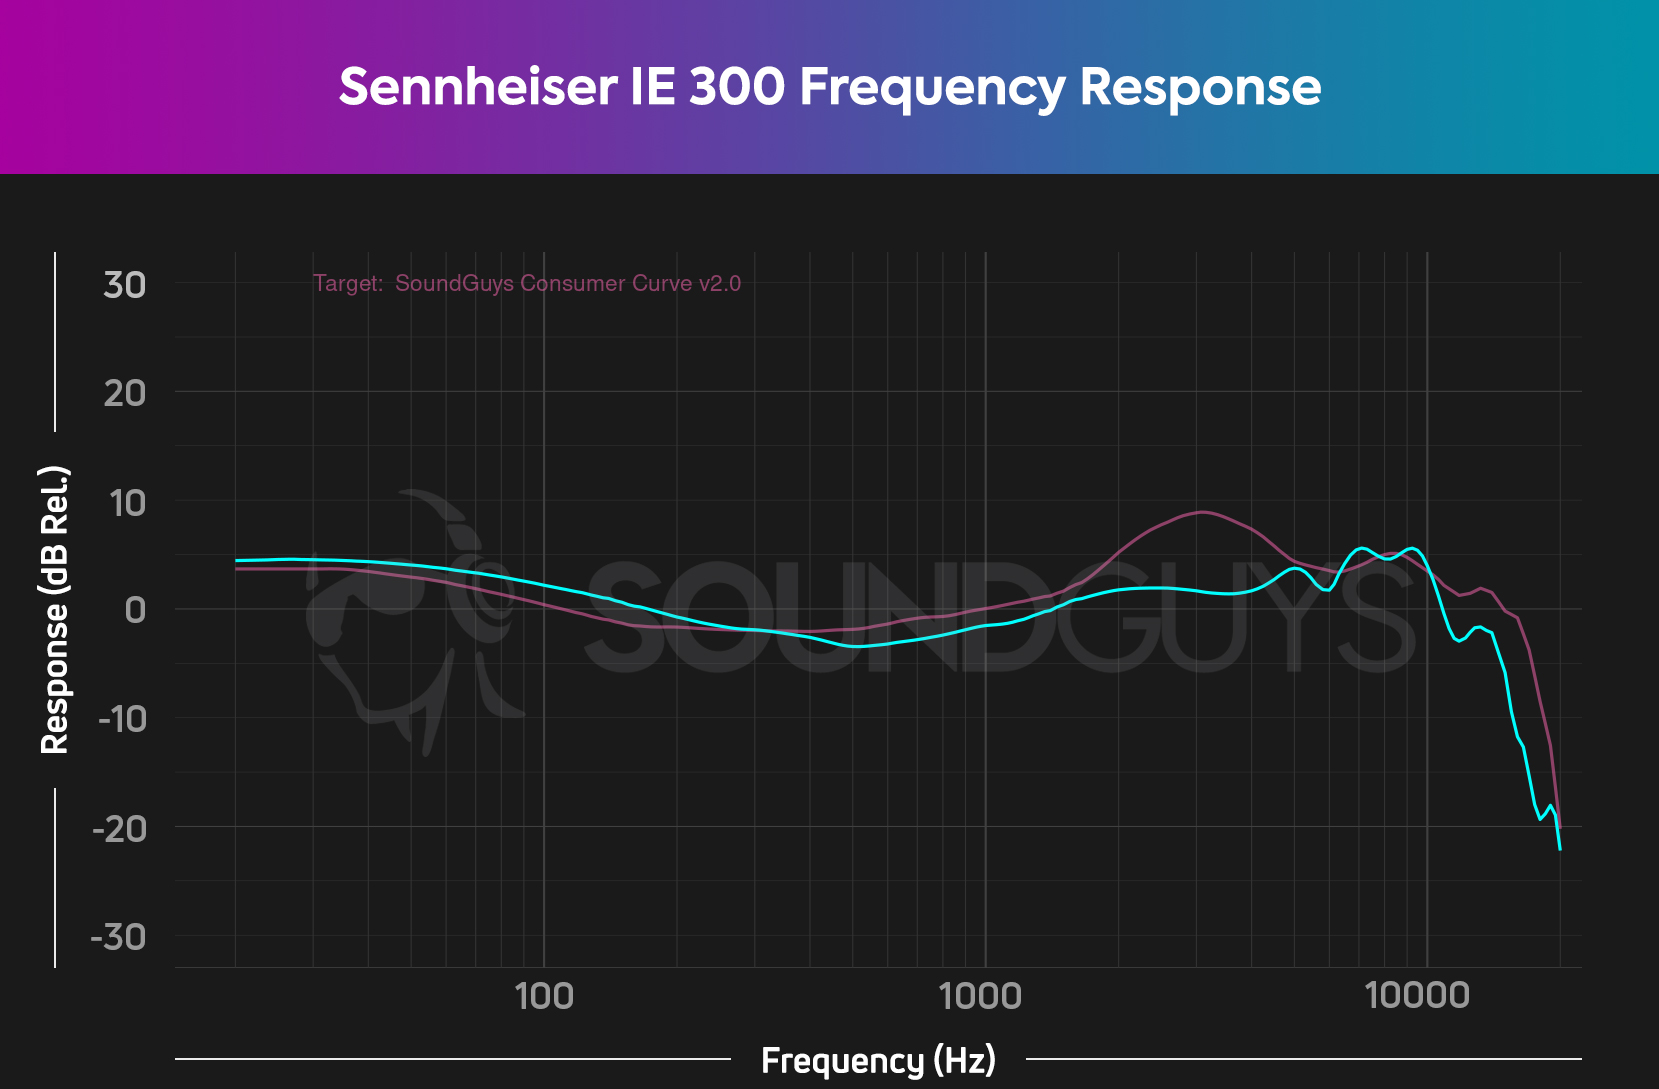 Frequency response of Sennheiser IE 300 set against the ideal consumer curve.